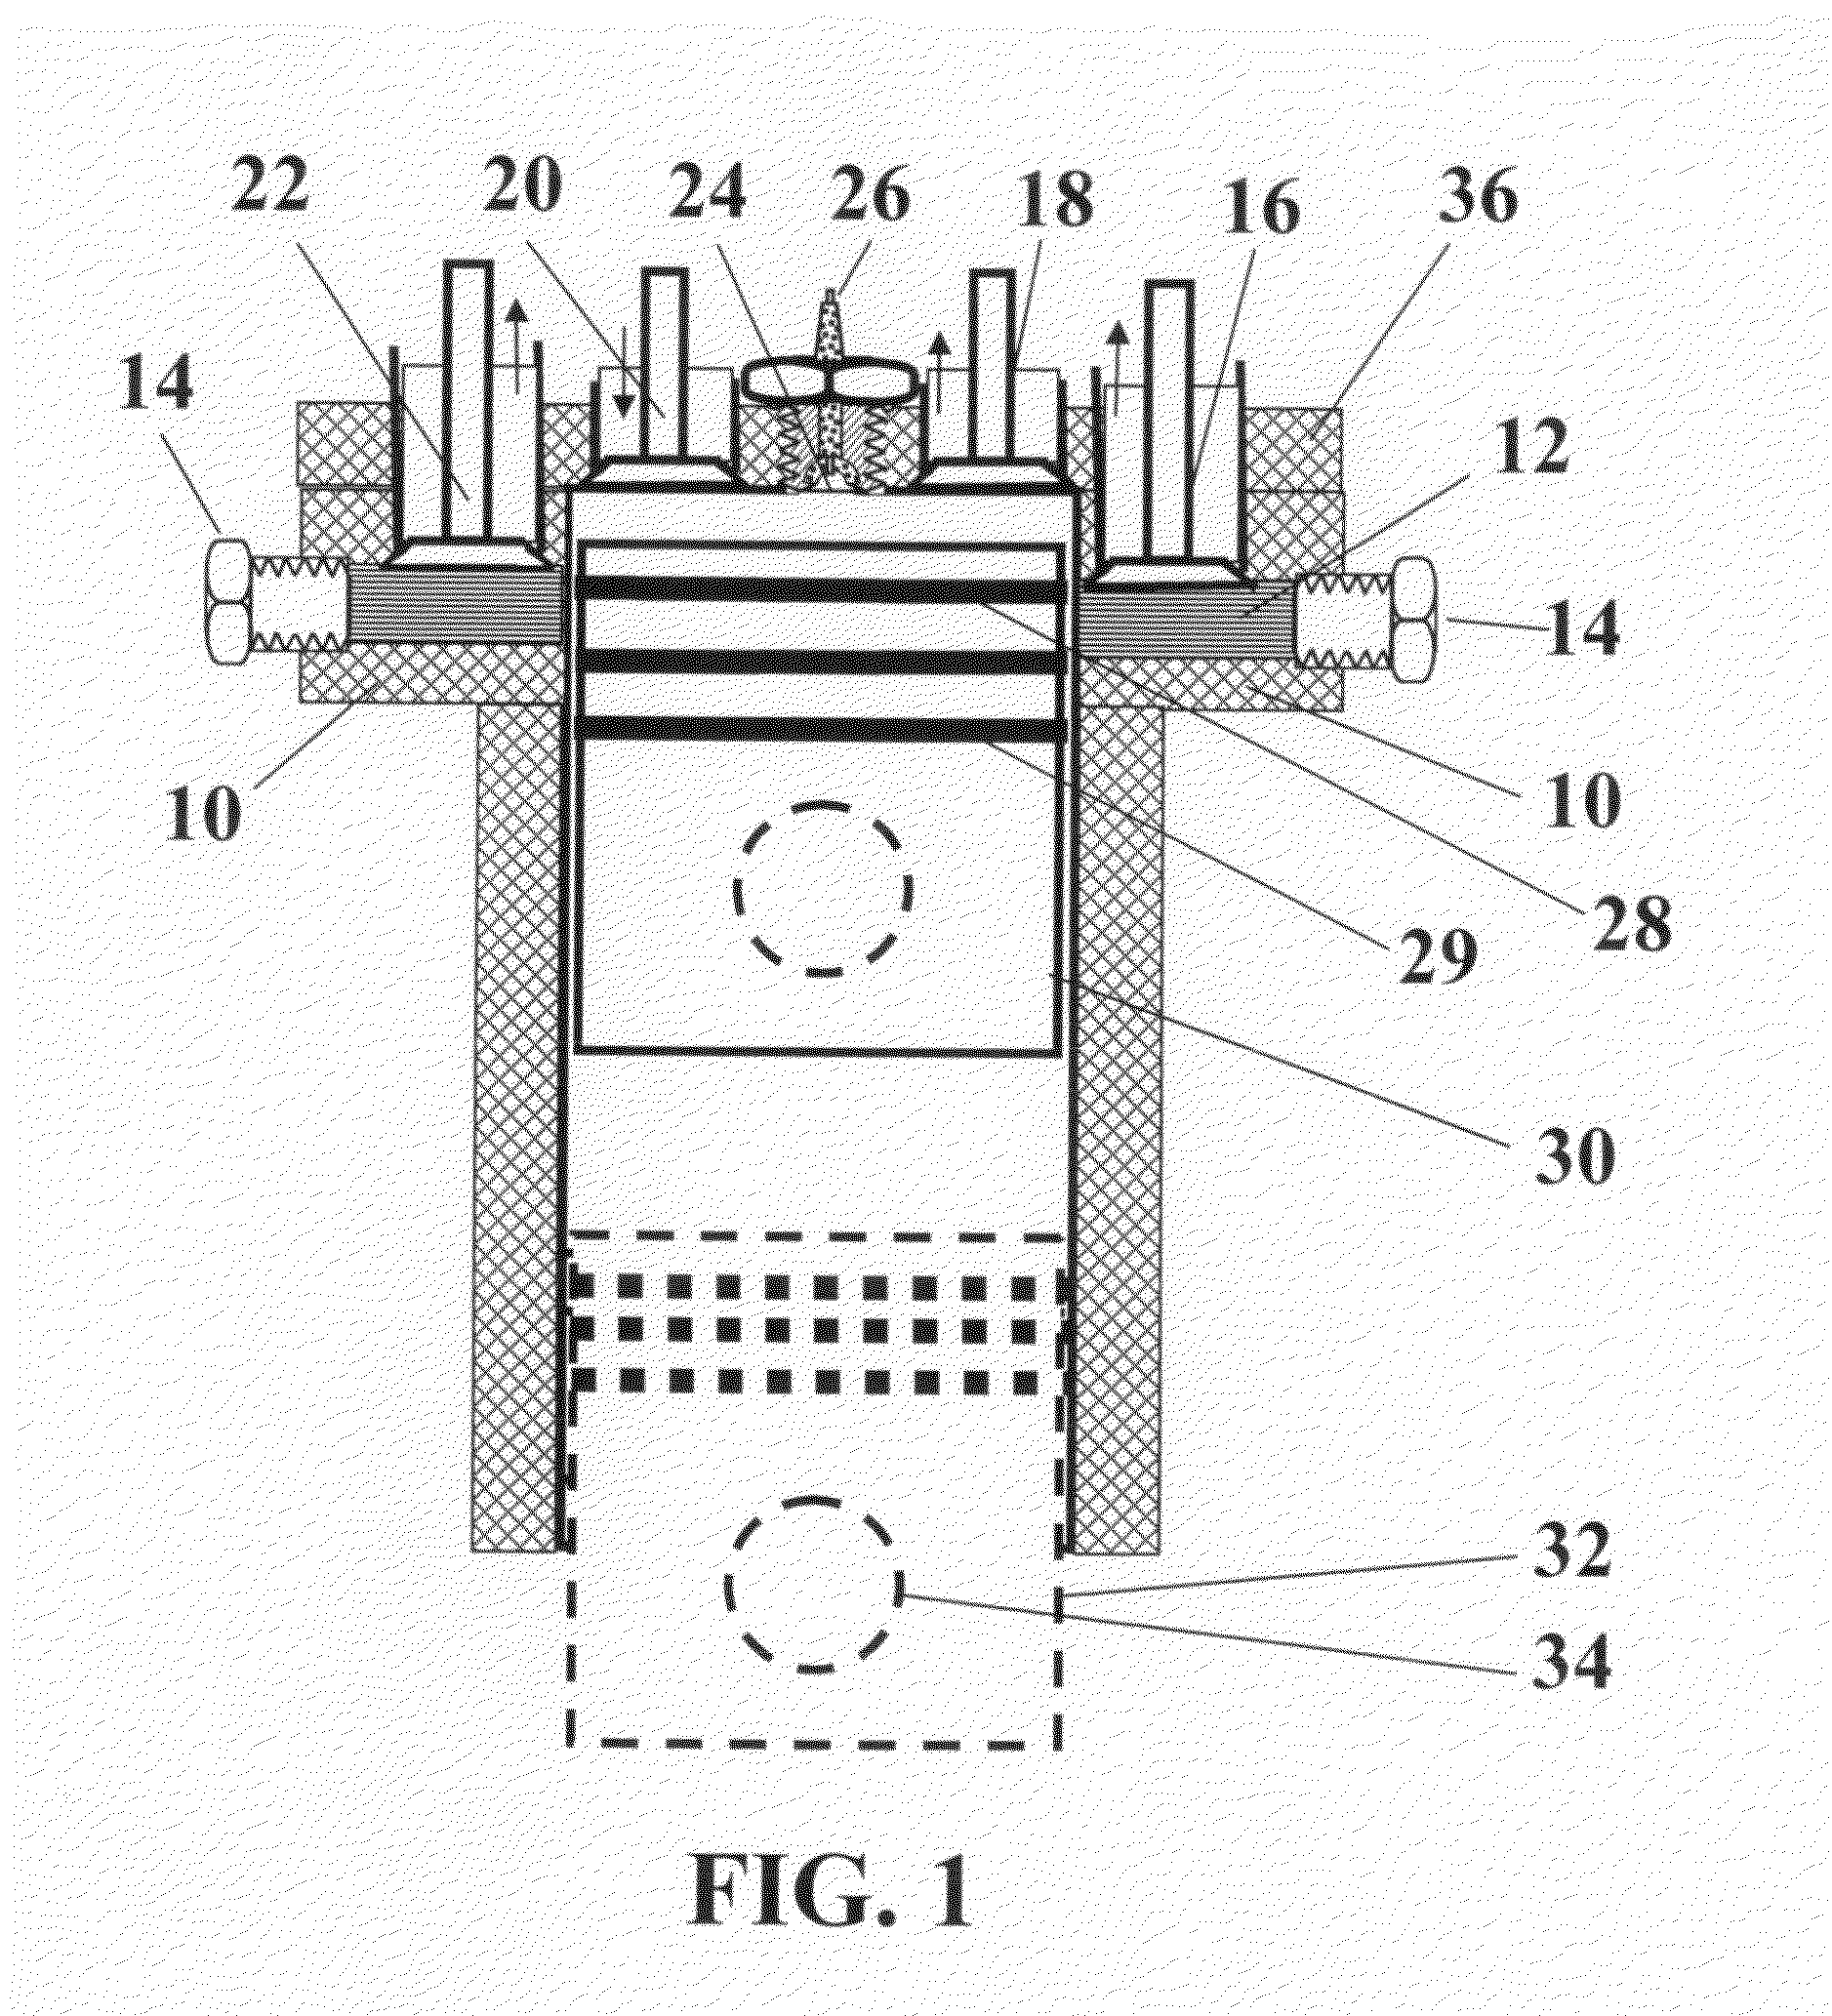 Accelerated compression ignition engine for HCCI